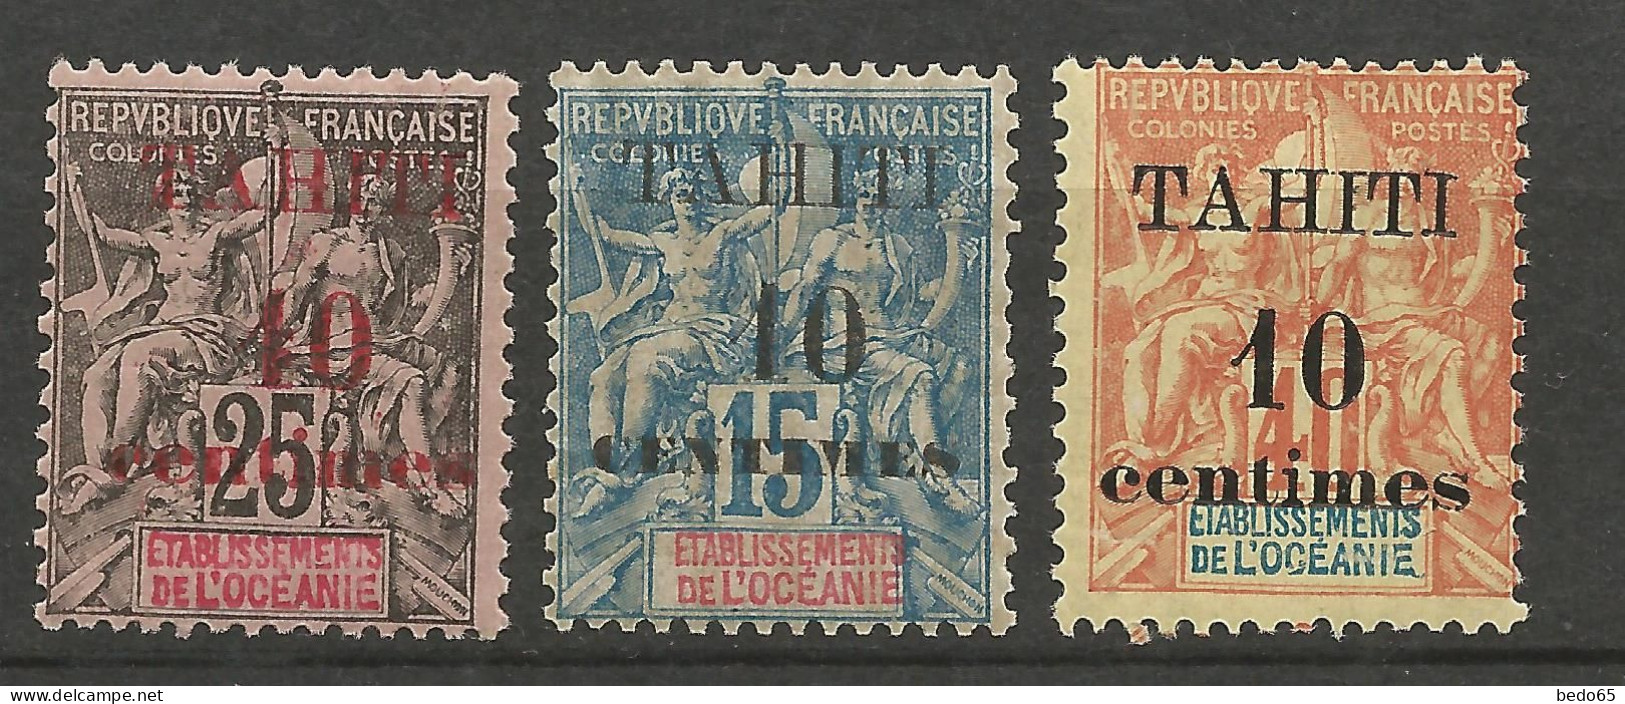 TAHITI Série Complète  N° 31 à 33 NEUF** SANS CHARNIERE  / Hingeless /MNH - Unused Stamps